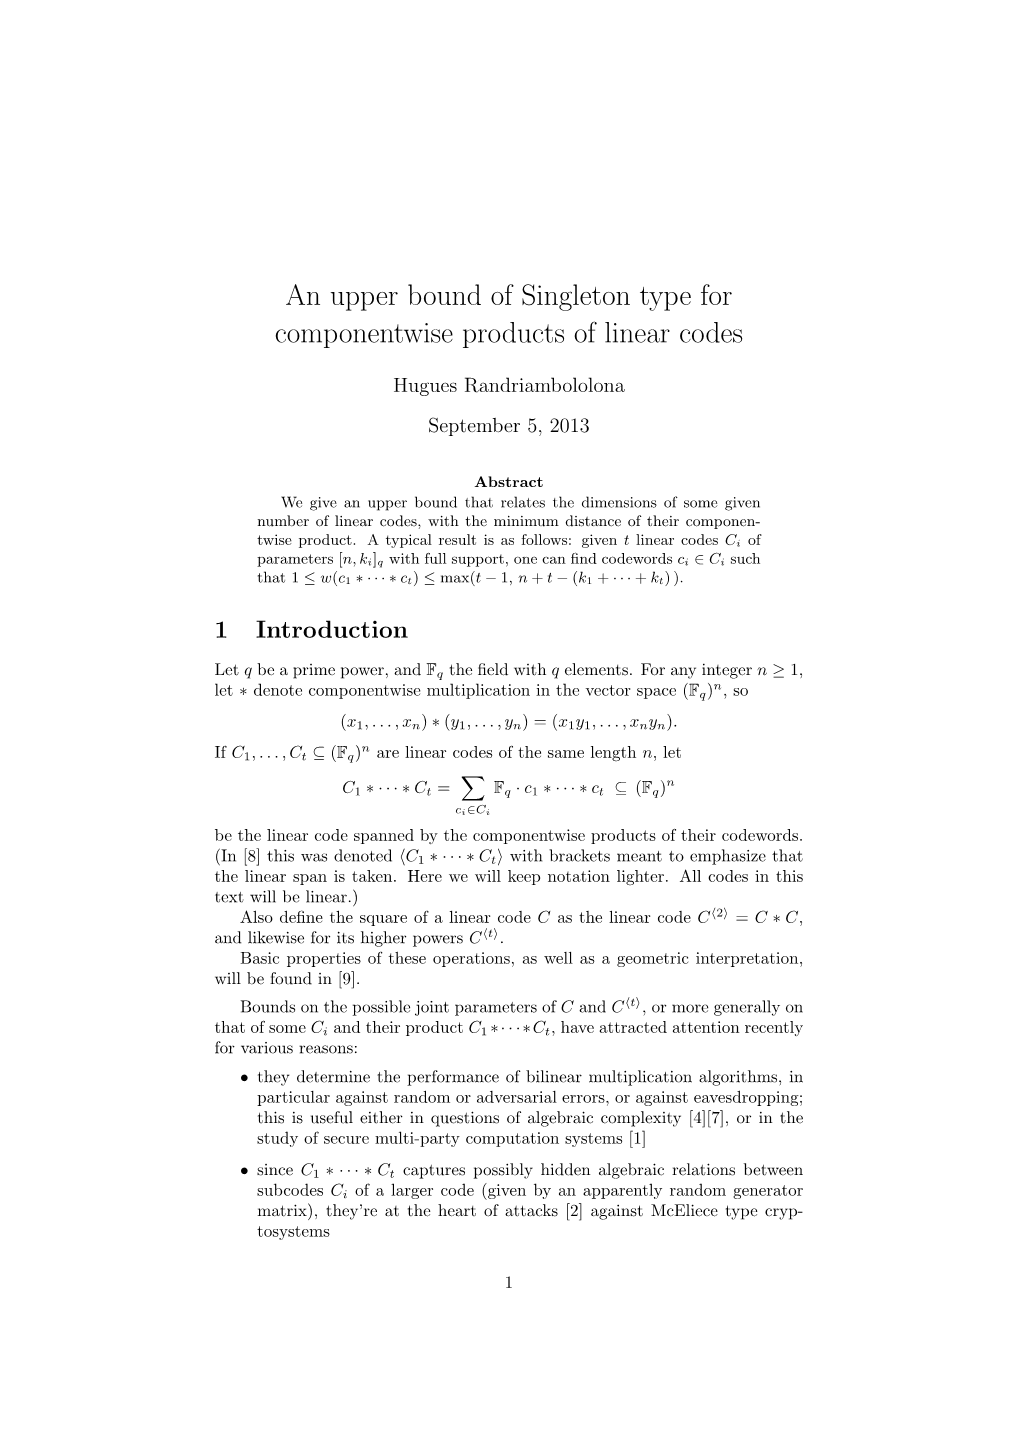 An Upper Bound of Singleton Type for Componentwise Products of Linear Codes